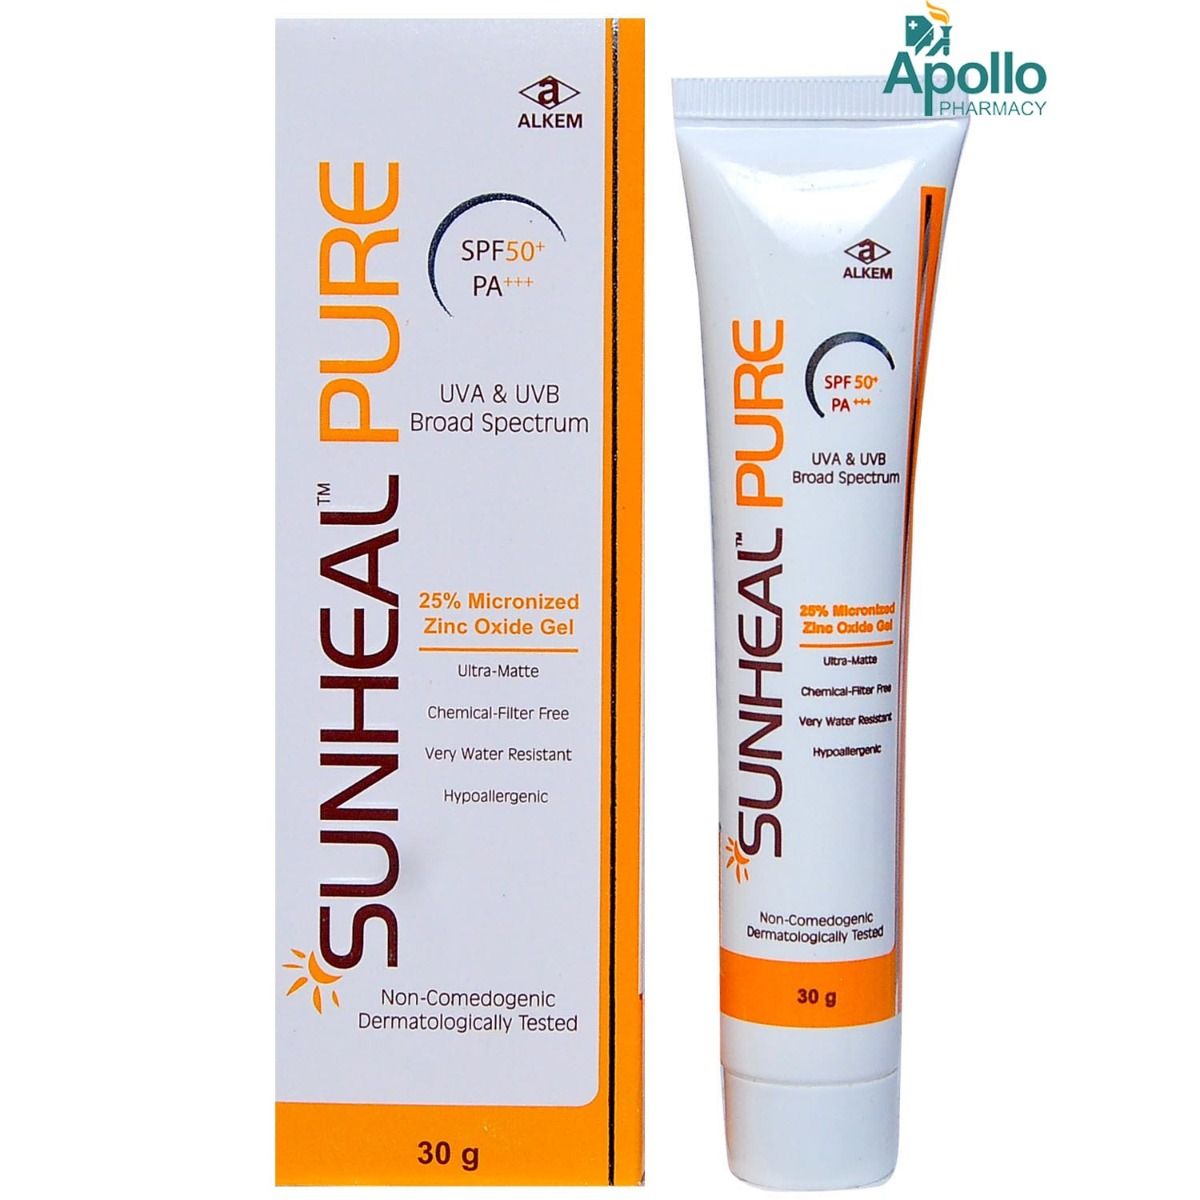 Sunheal Pure SPF 50+ Gel 30 gm Price, Uses, Side Effects, Composition - Apollo Pharmacy